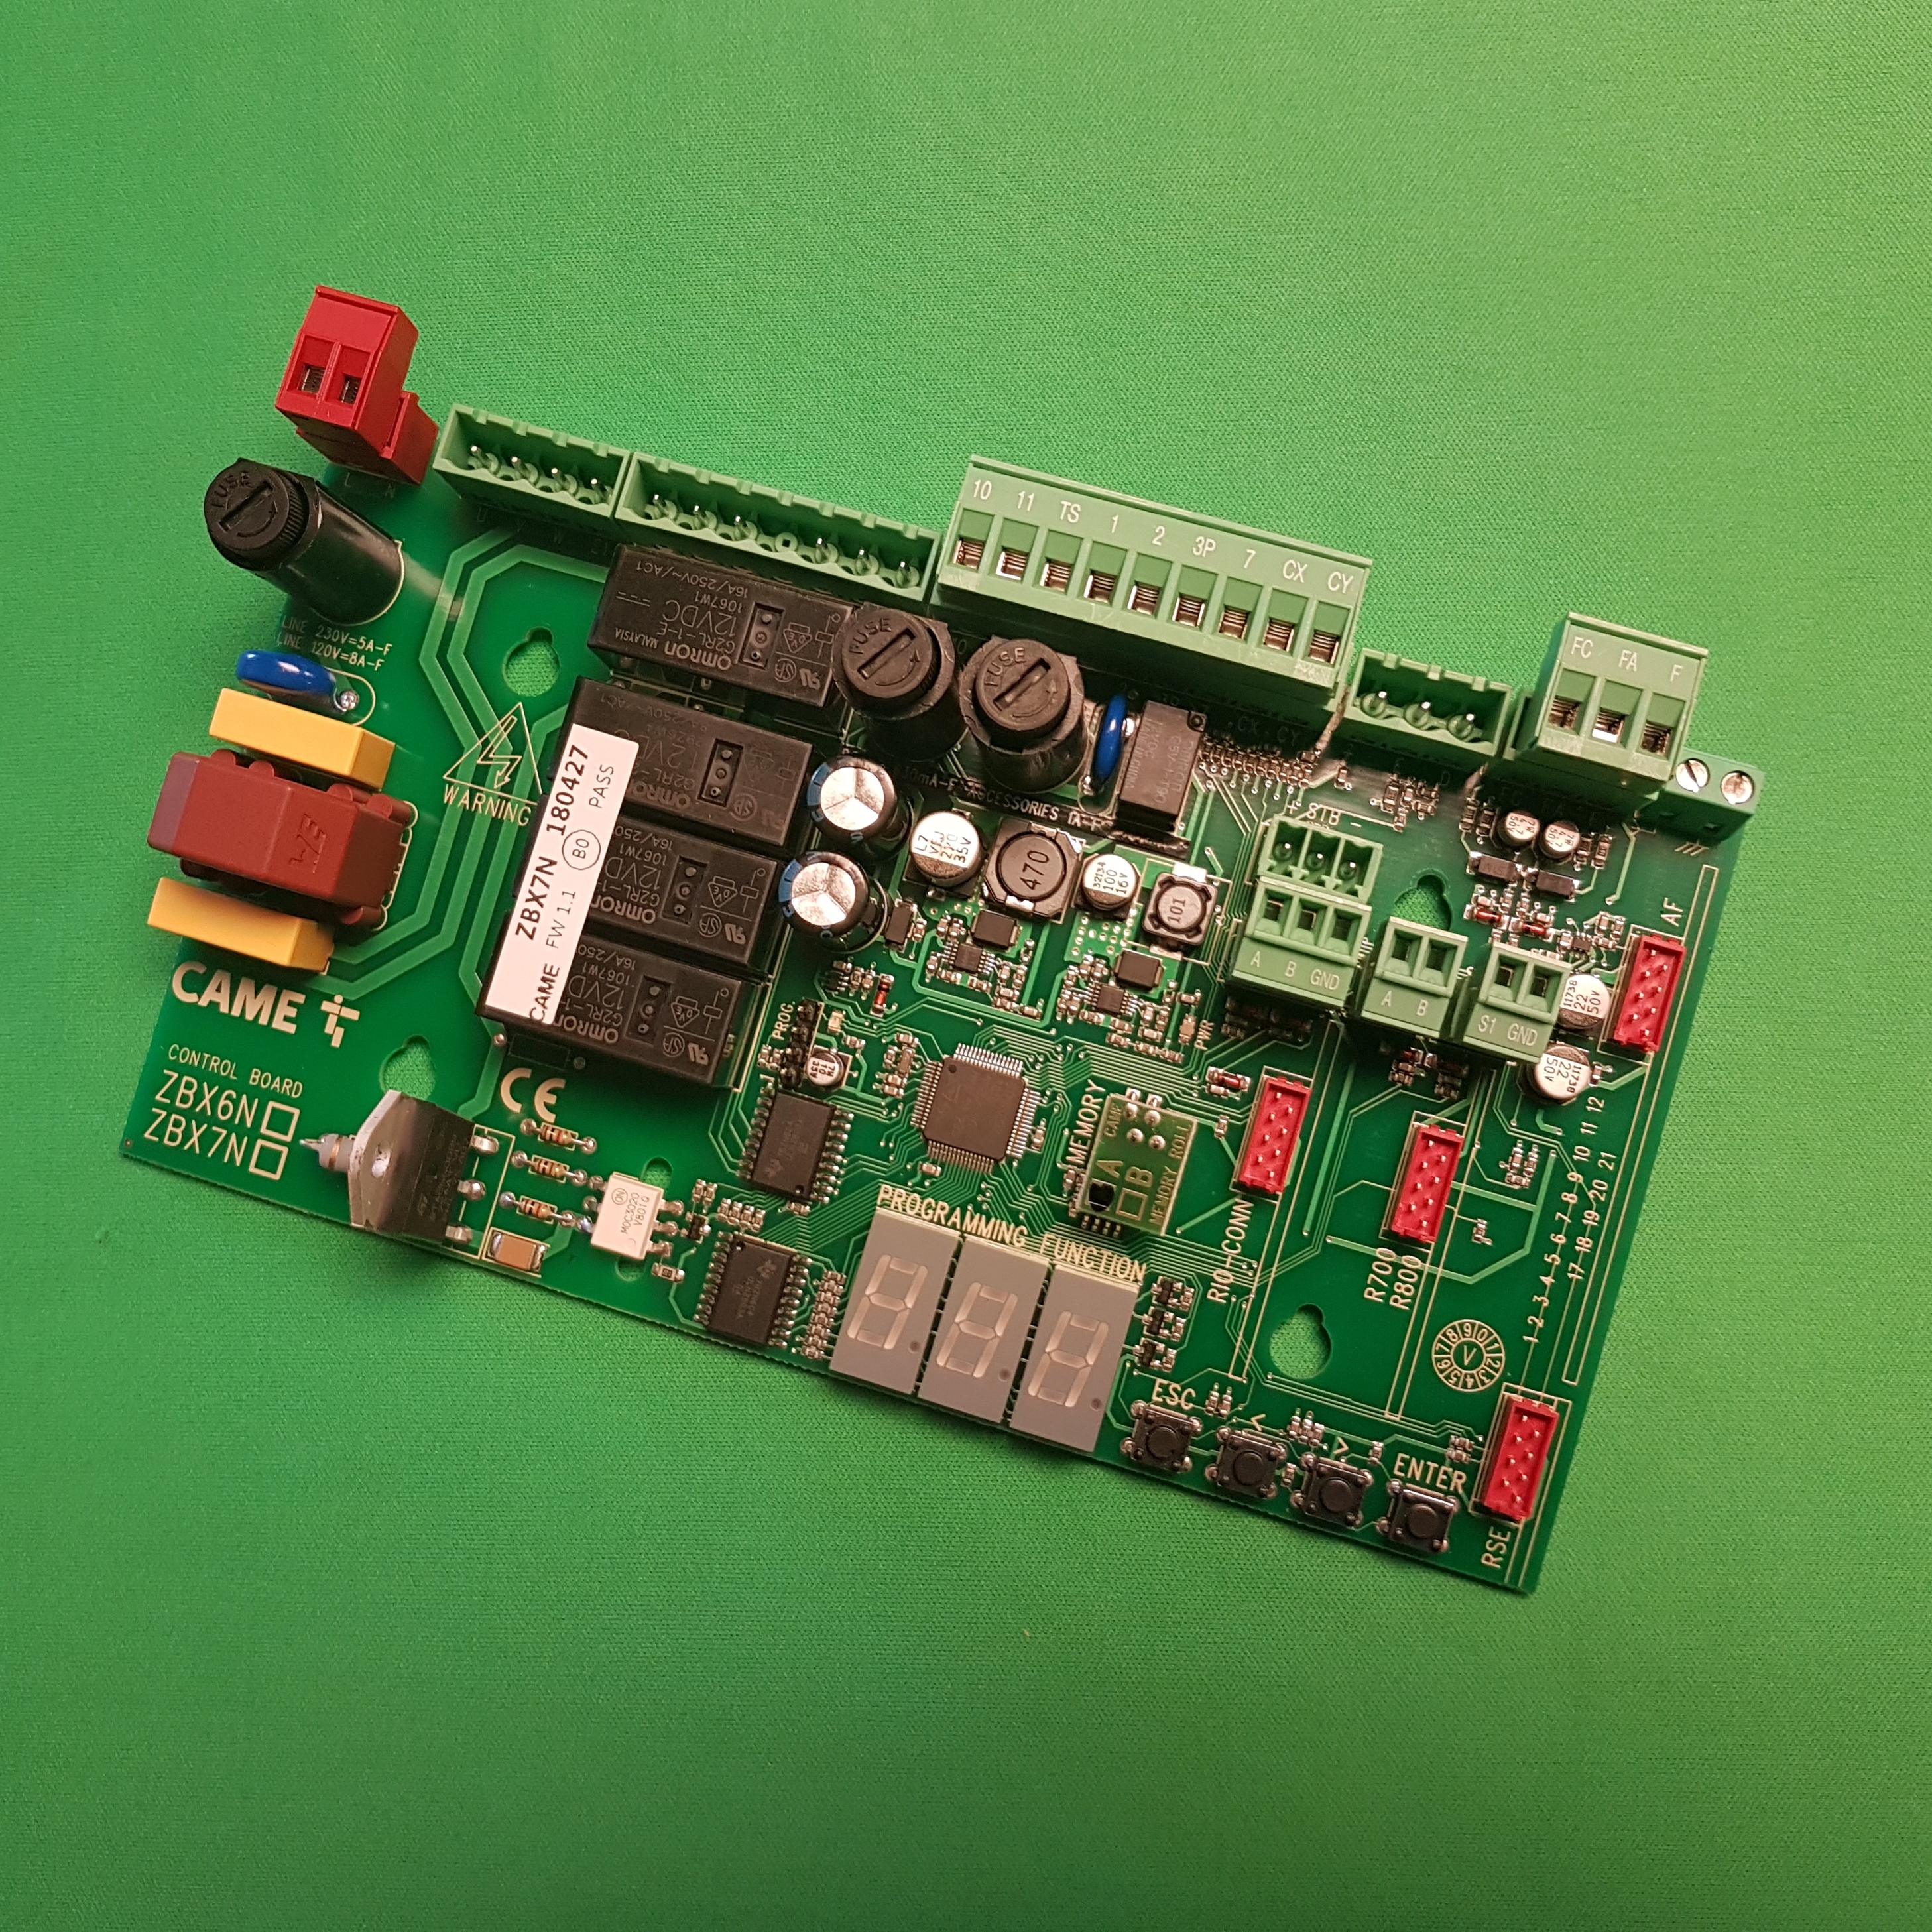 CAME 3199ZT6 Gate Control Panel PCB